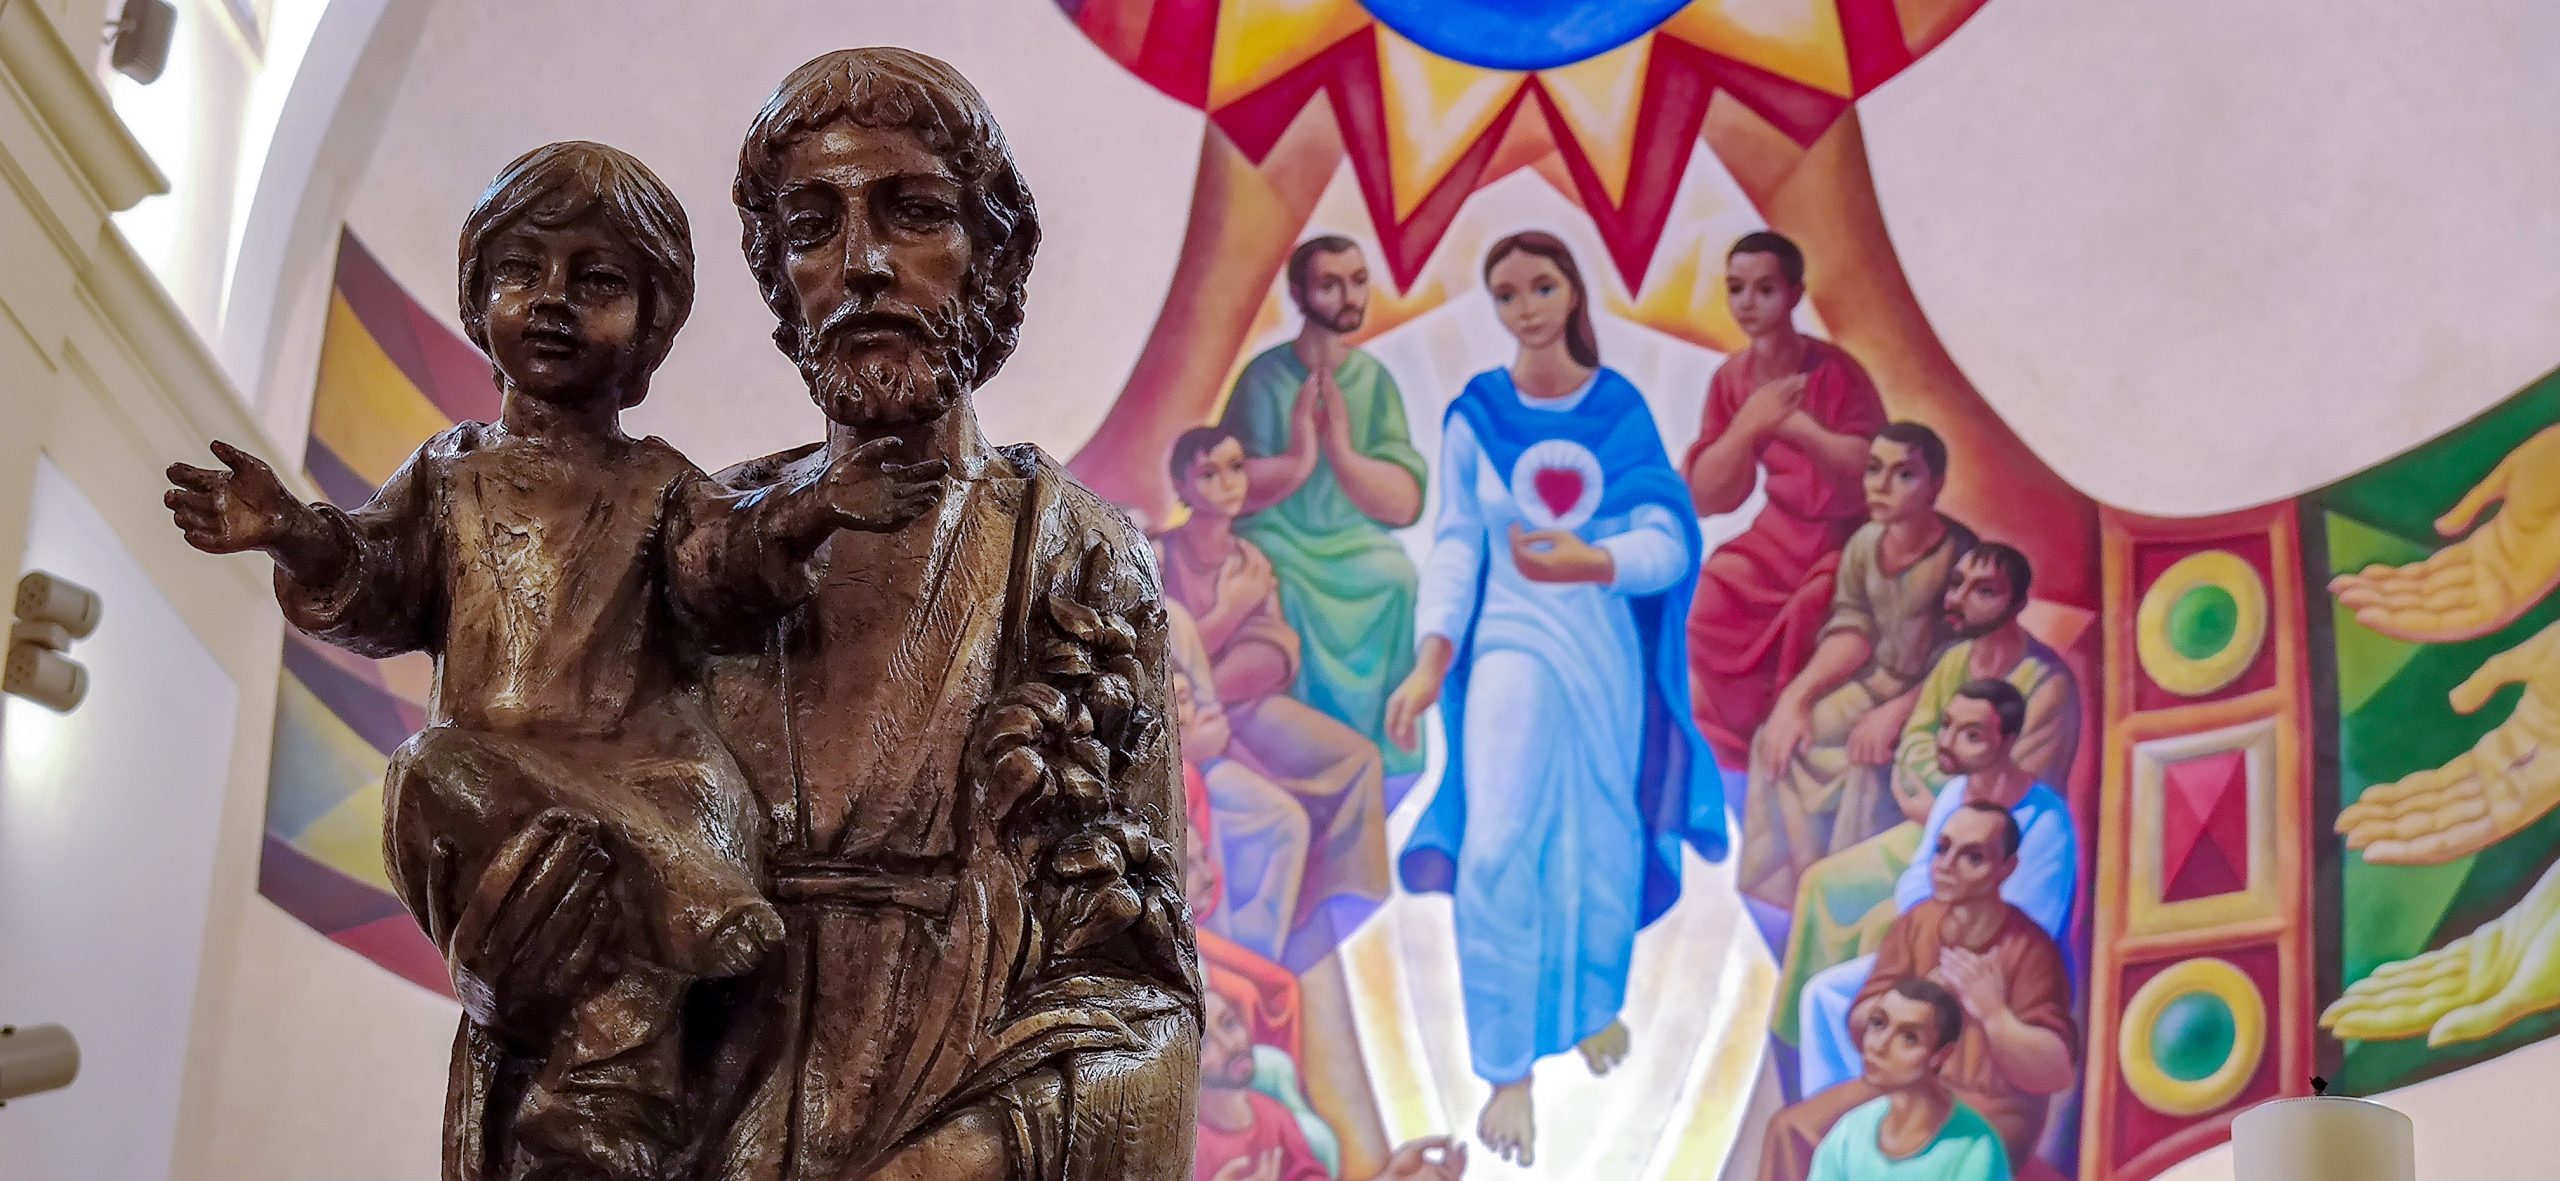 On the Feast of St. Joseph, Copatron of the Congregation